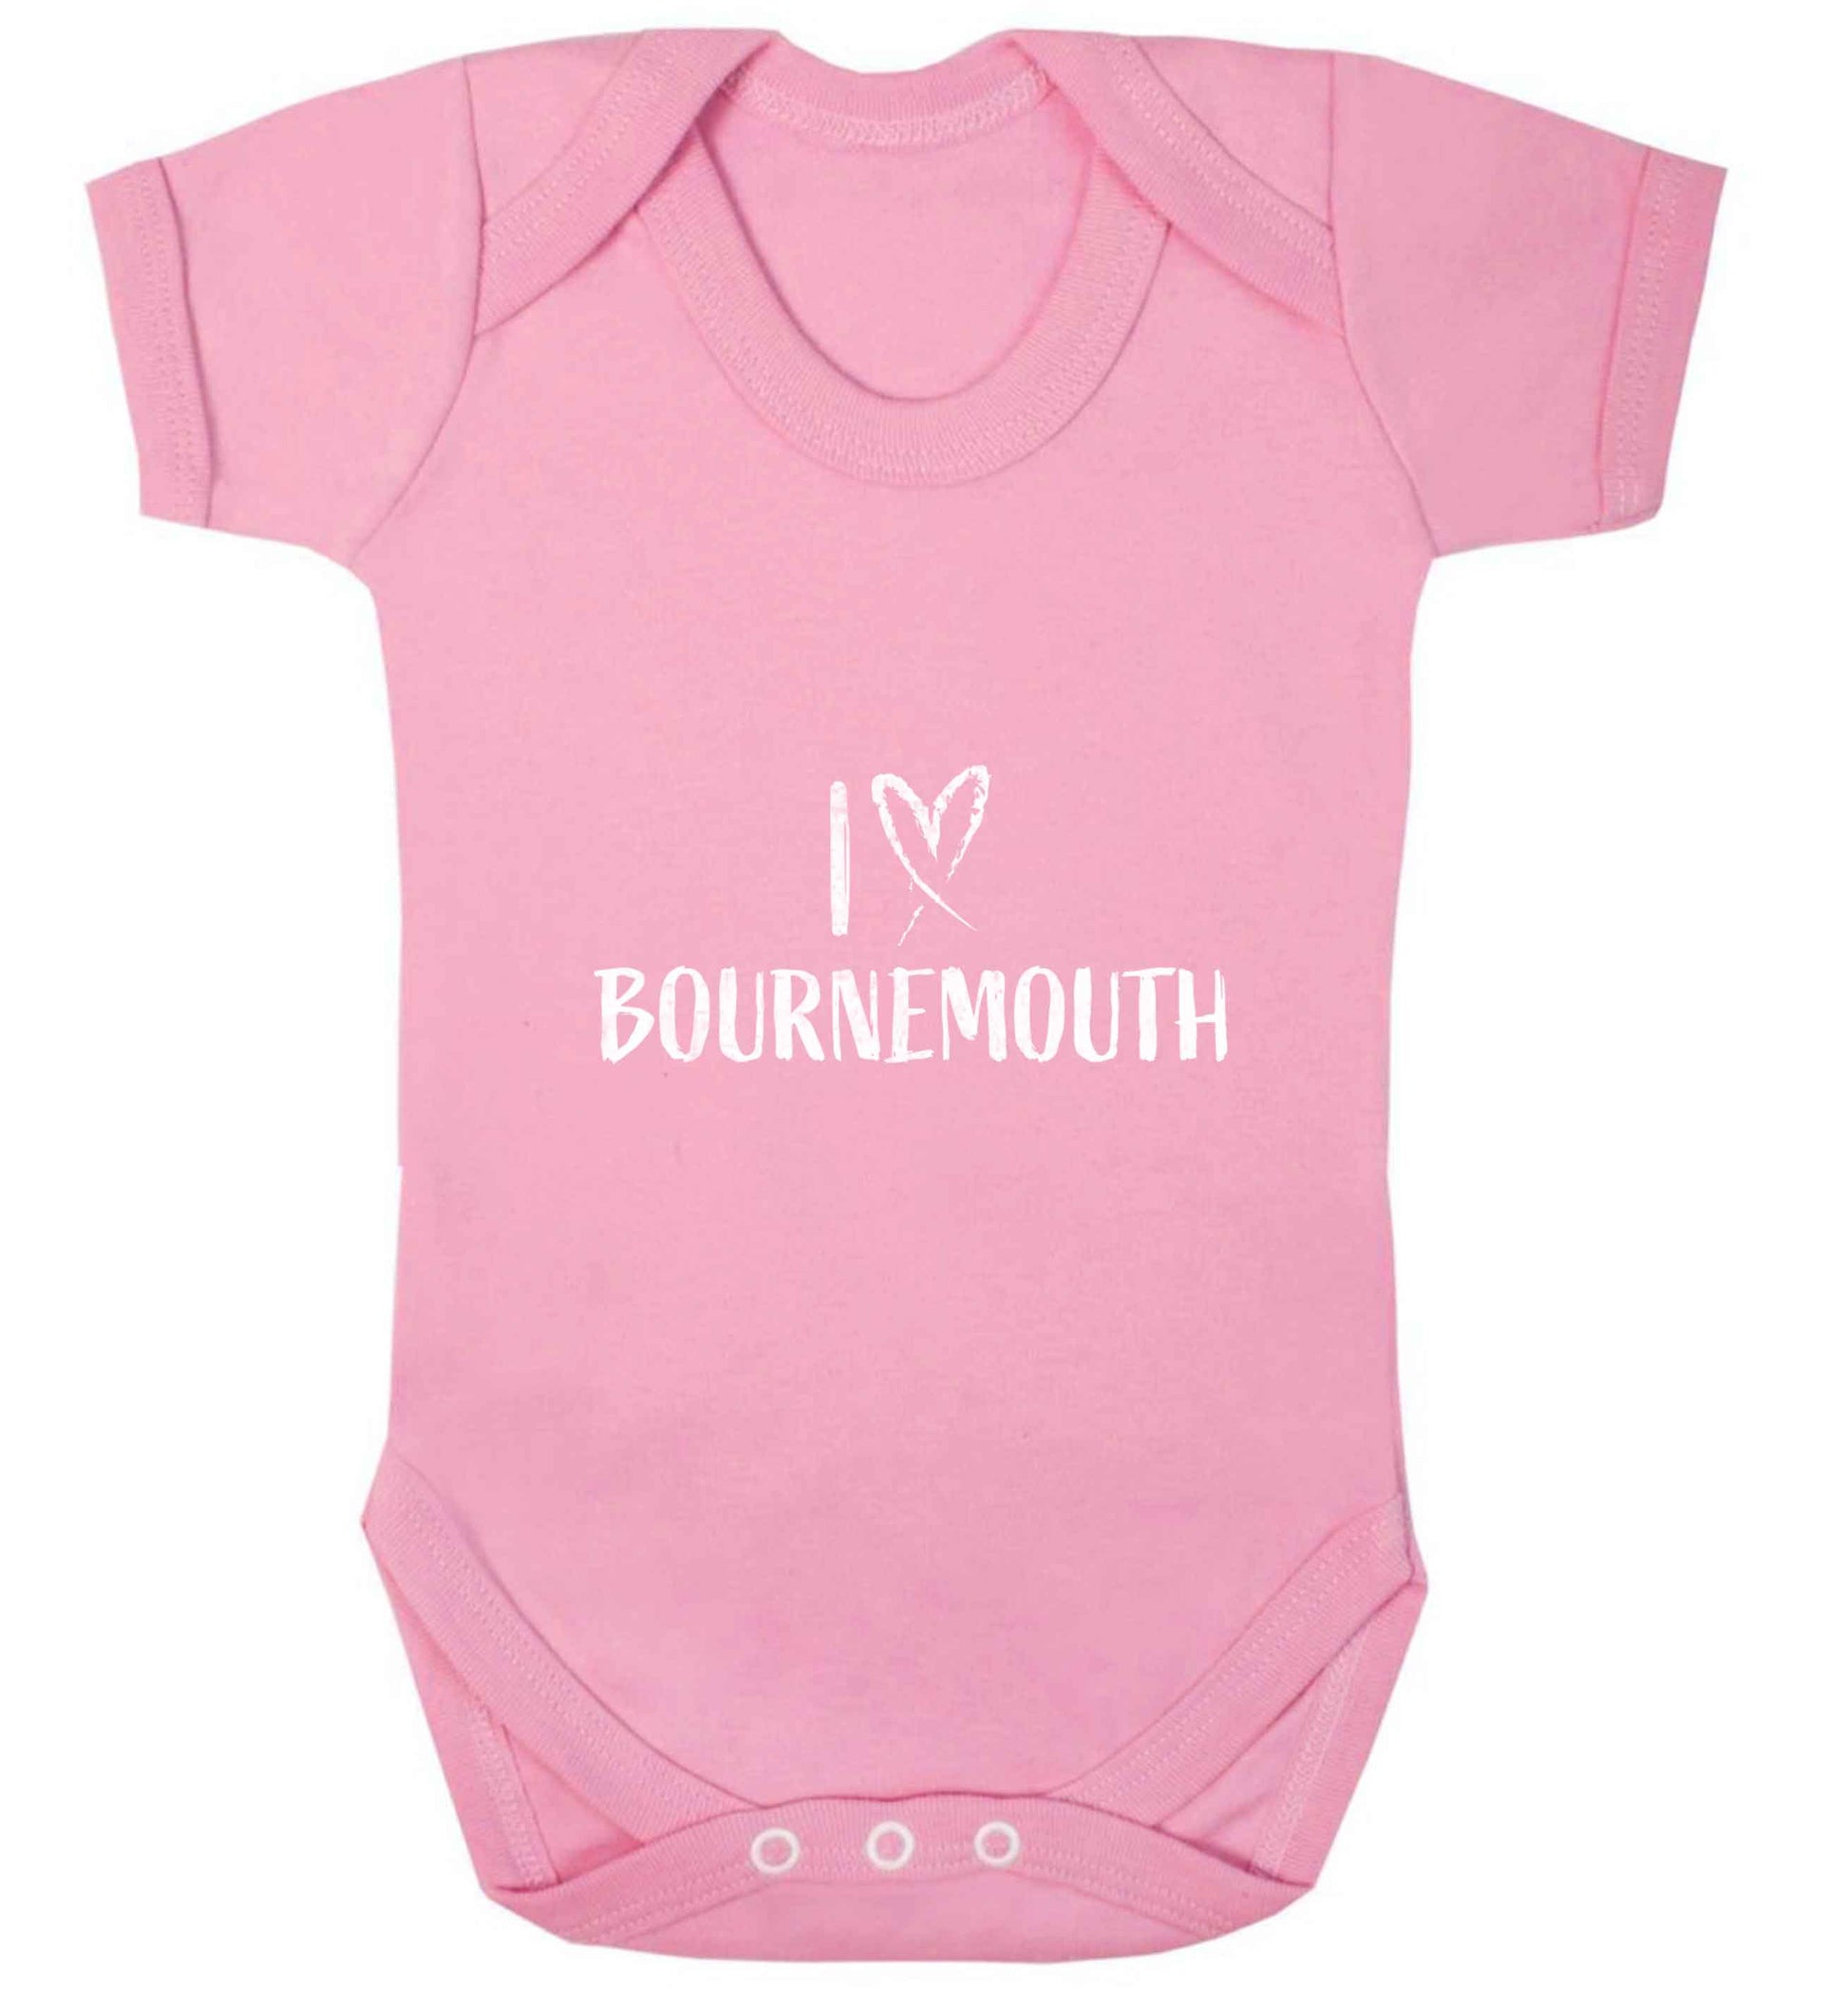 I love Bournemouth baby vest pale pink 18-24 months